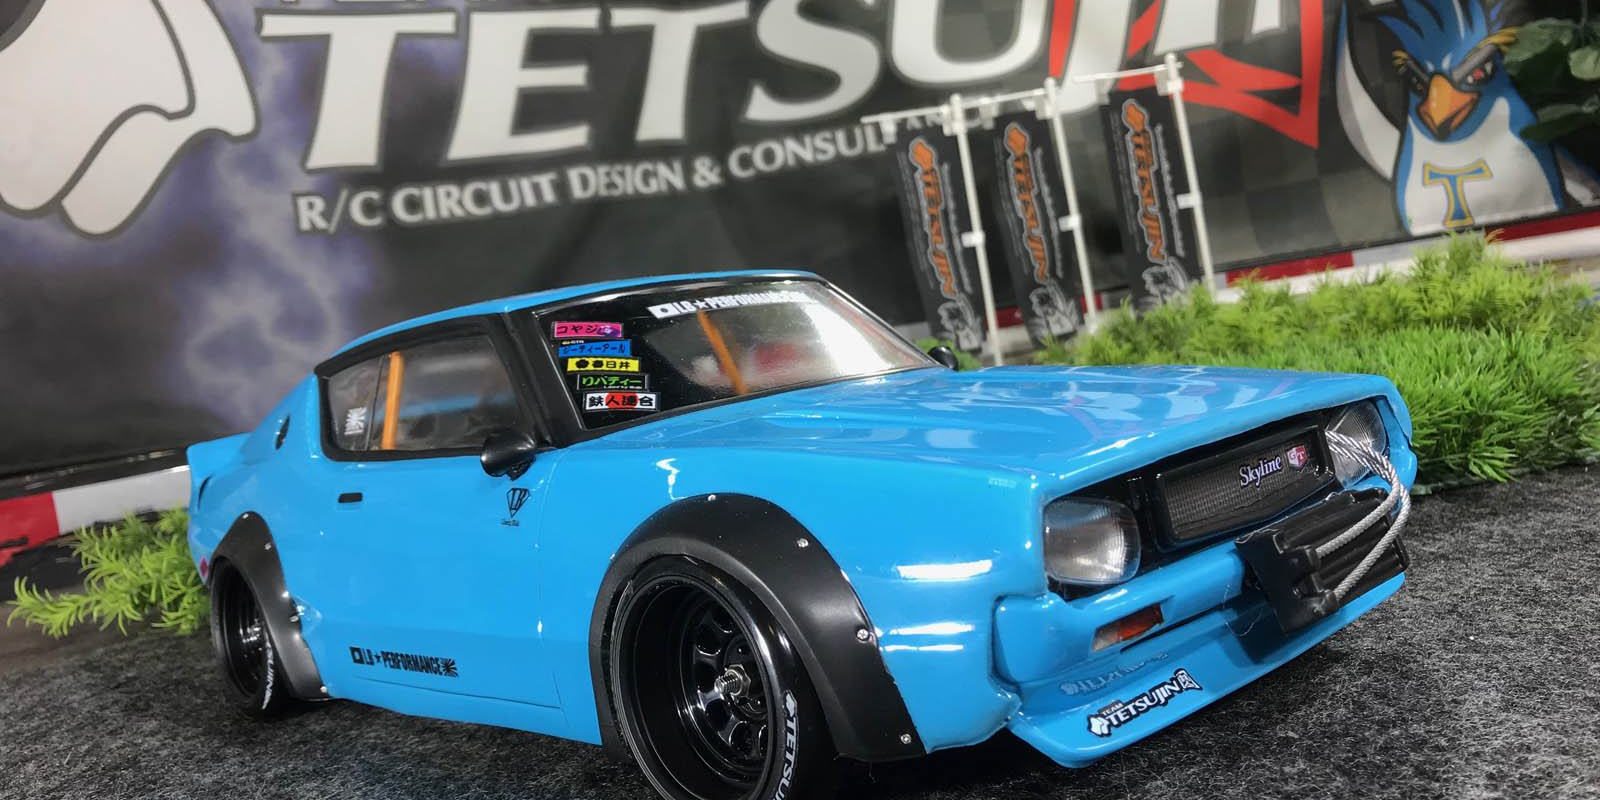 Team Tetsujin Nissan Skyline 2000 GT-R Body - Your Home for RC